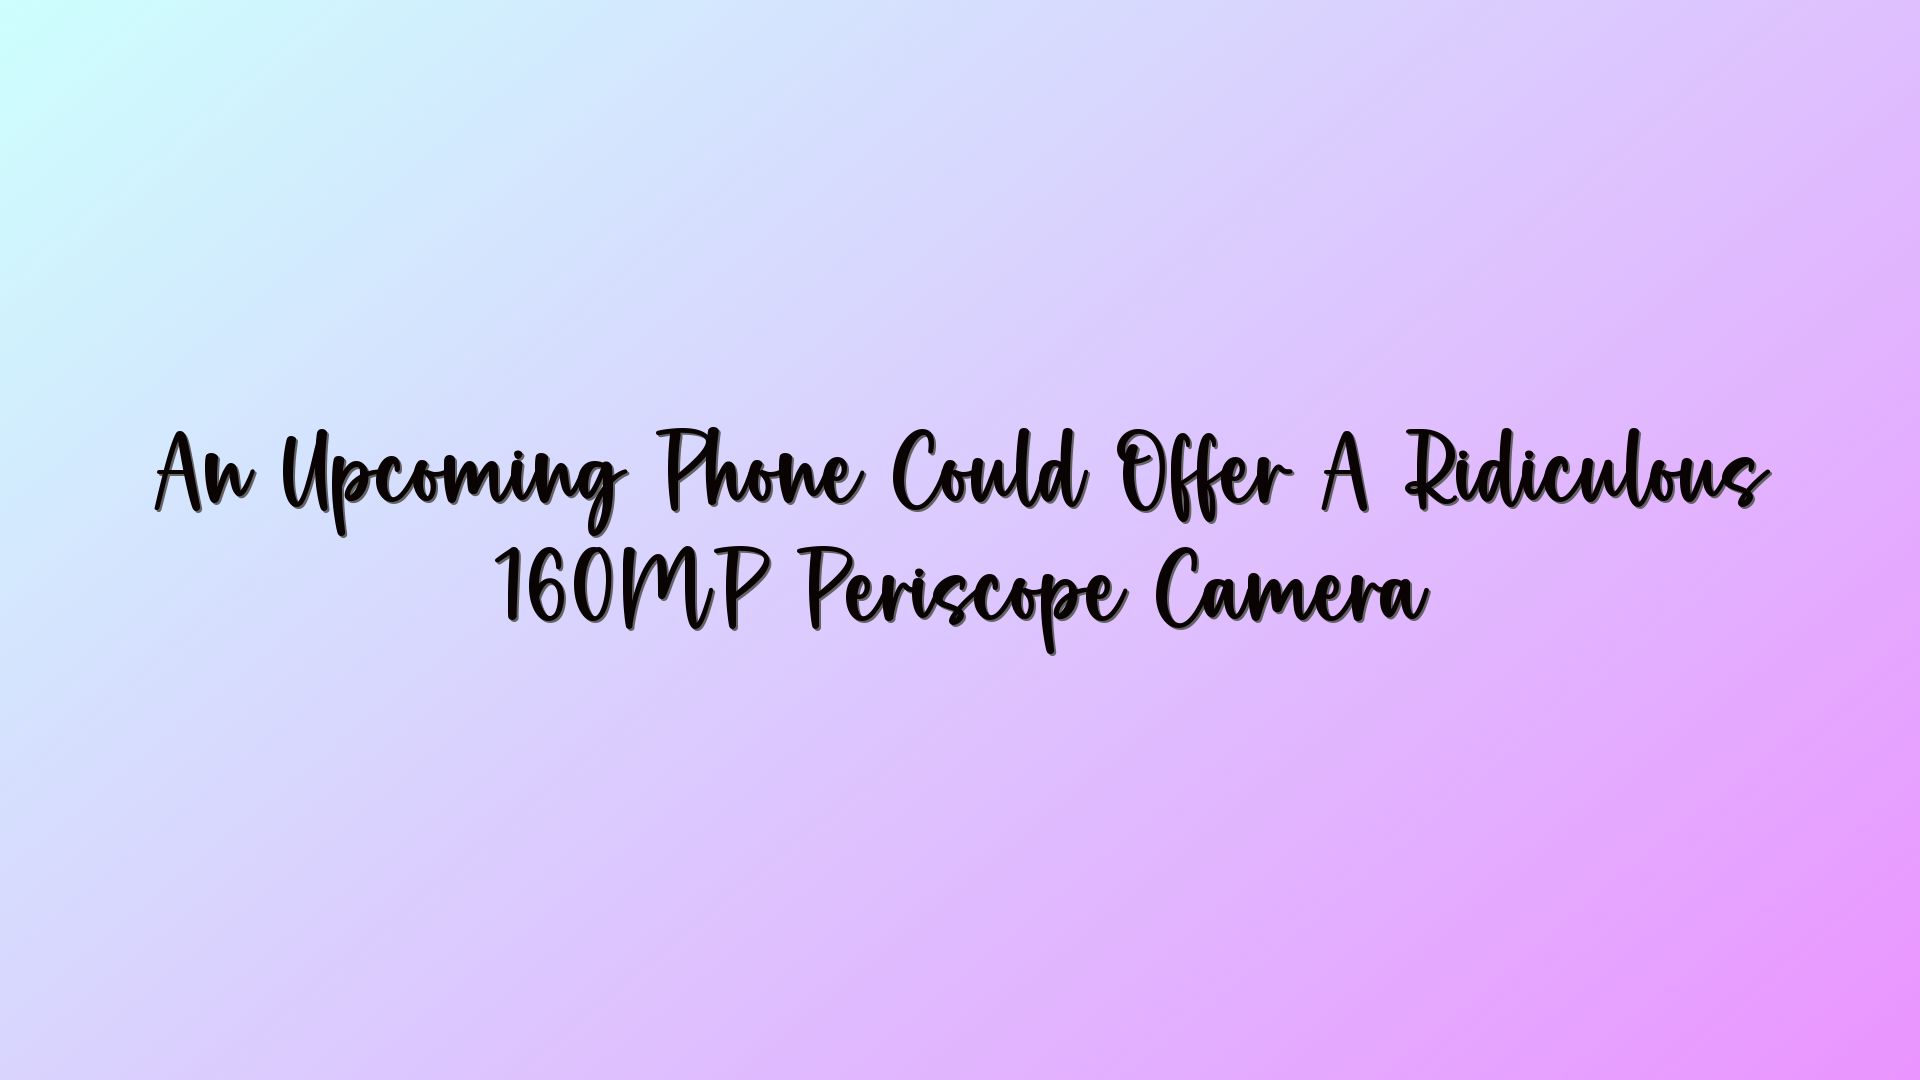 An Upcoming Phone Could Offer A Ridiculous 160MP Periscope Camera